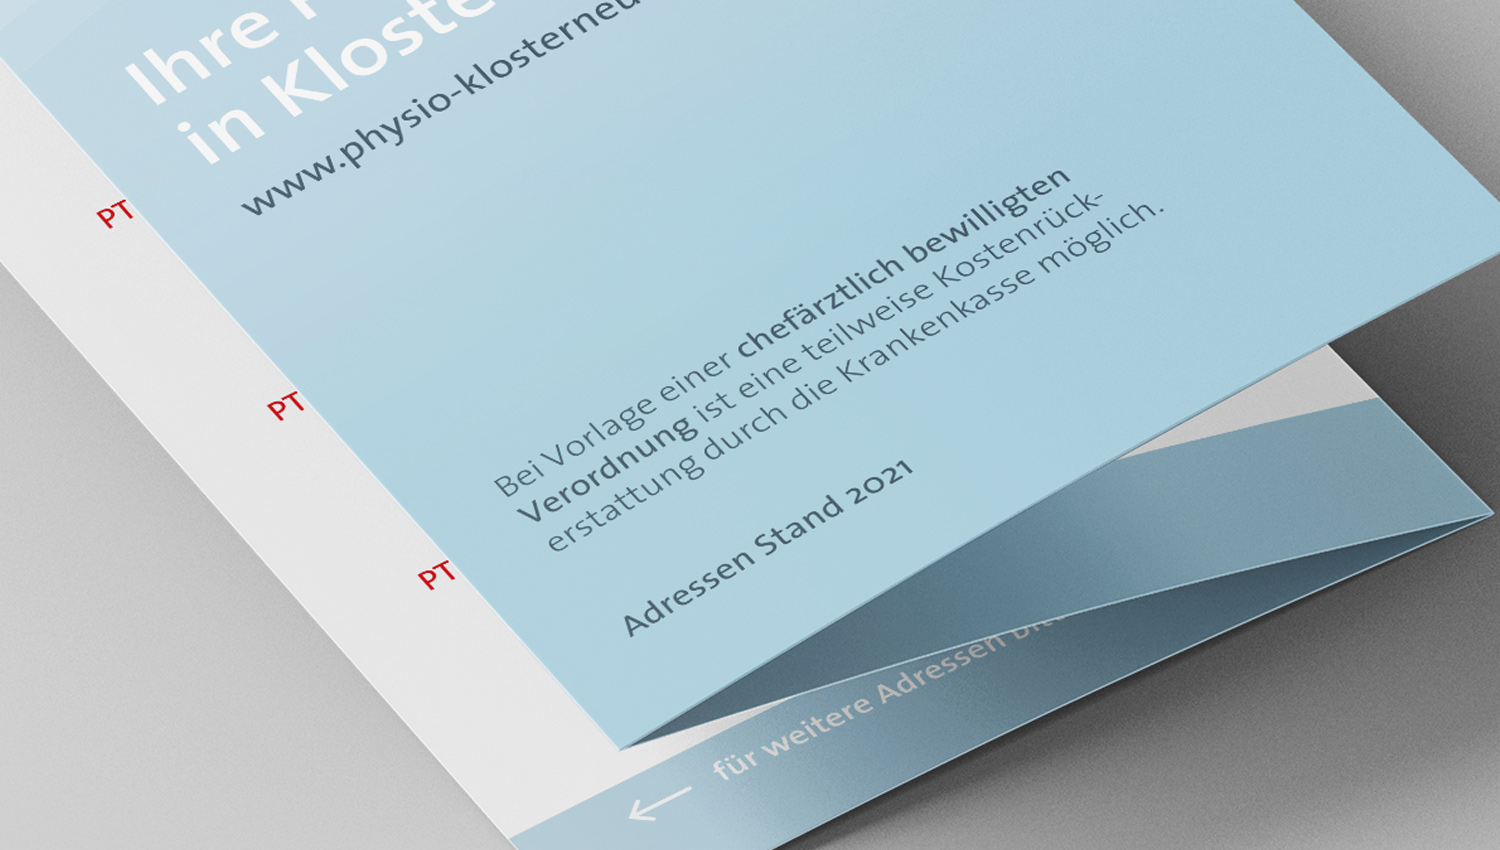 Physiotheraphie Folder Detailansicht Cover